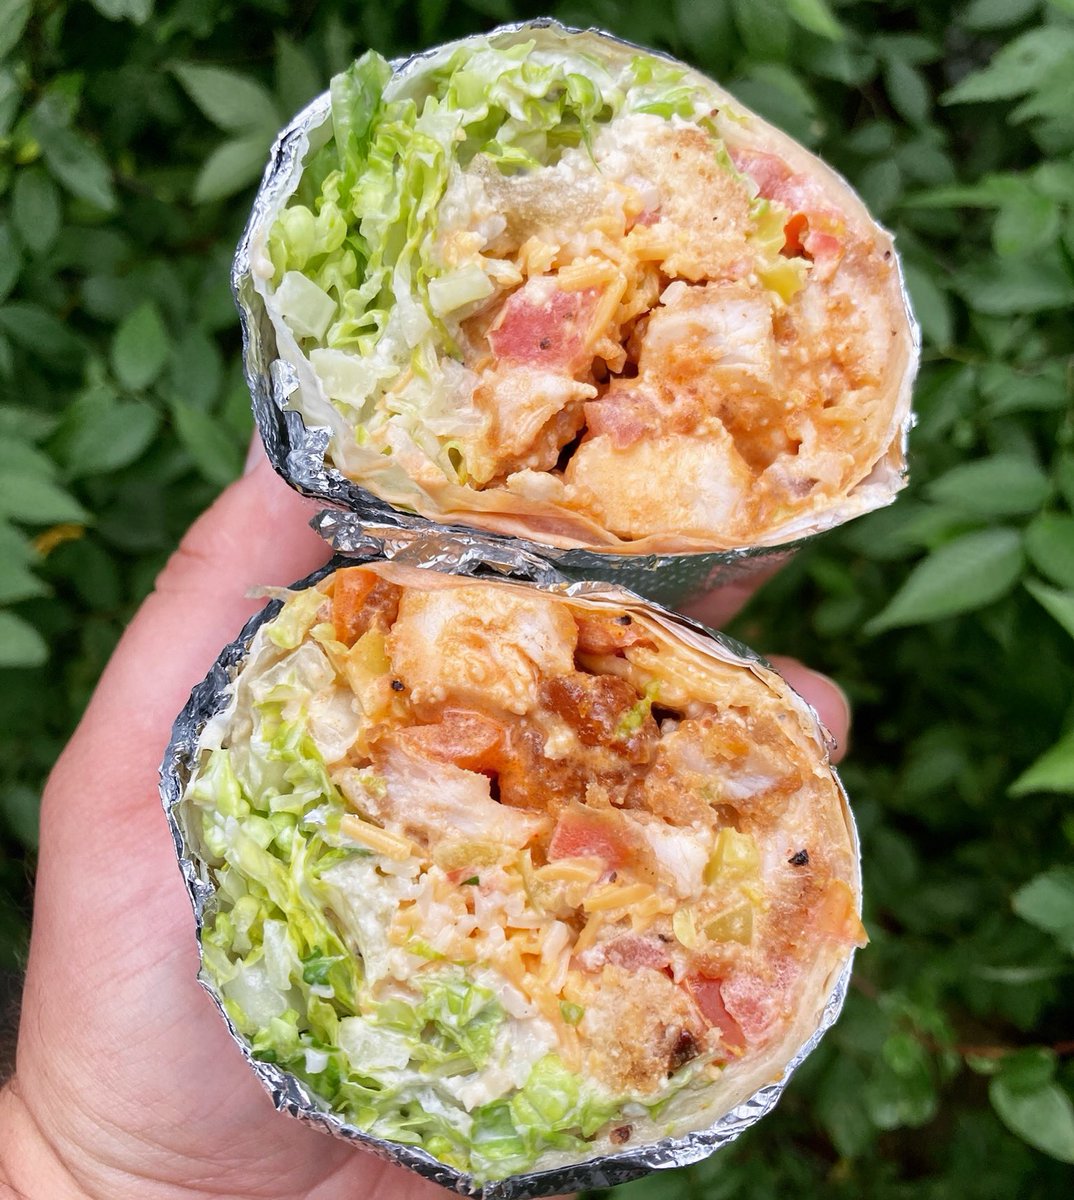 East Memphis, we’ll be at @restorationmem (5340 Quince Rd, Memphis, TN 38119) 11:00-1:00 today. Get today’s special, the Buffalo Chicken Caesar Wrap!

#Choose901 #ILoveMemphis